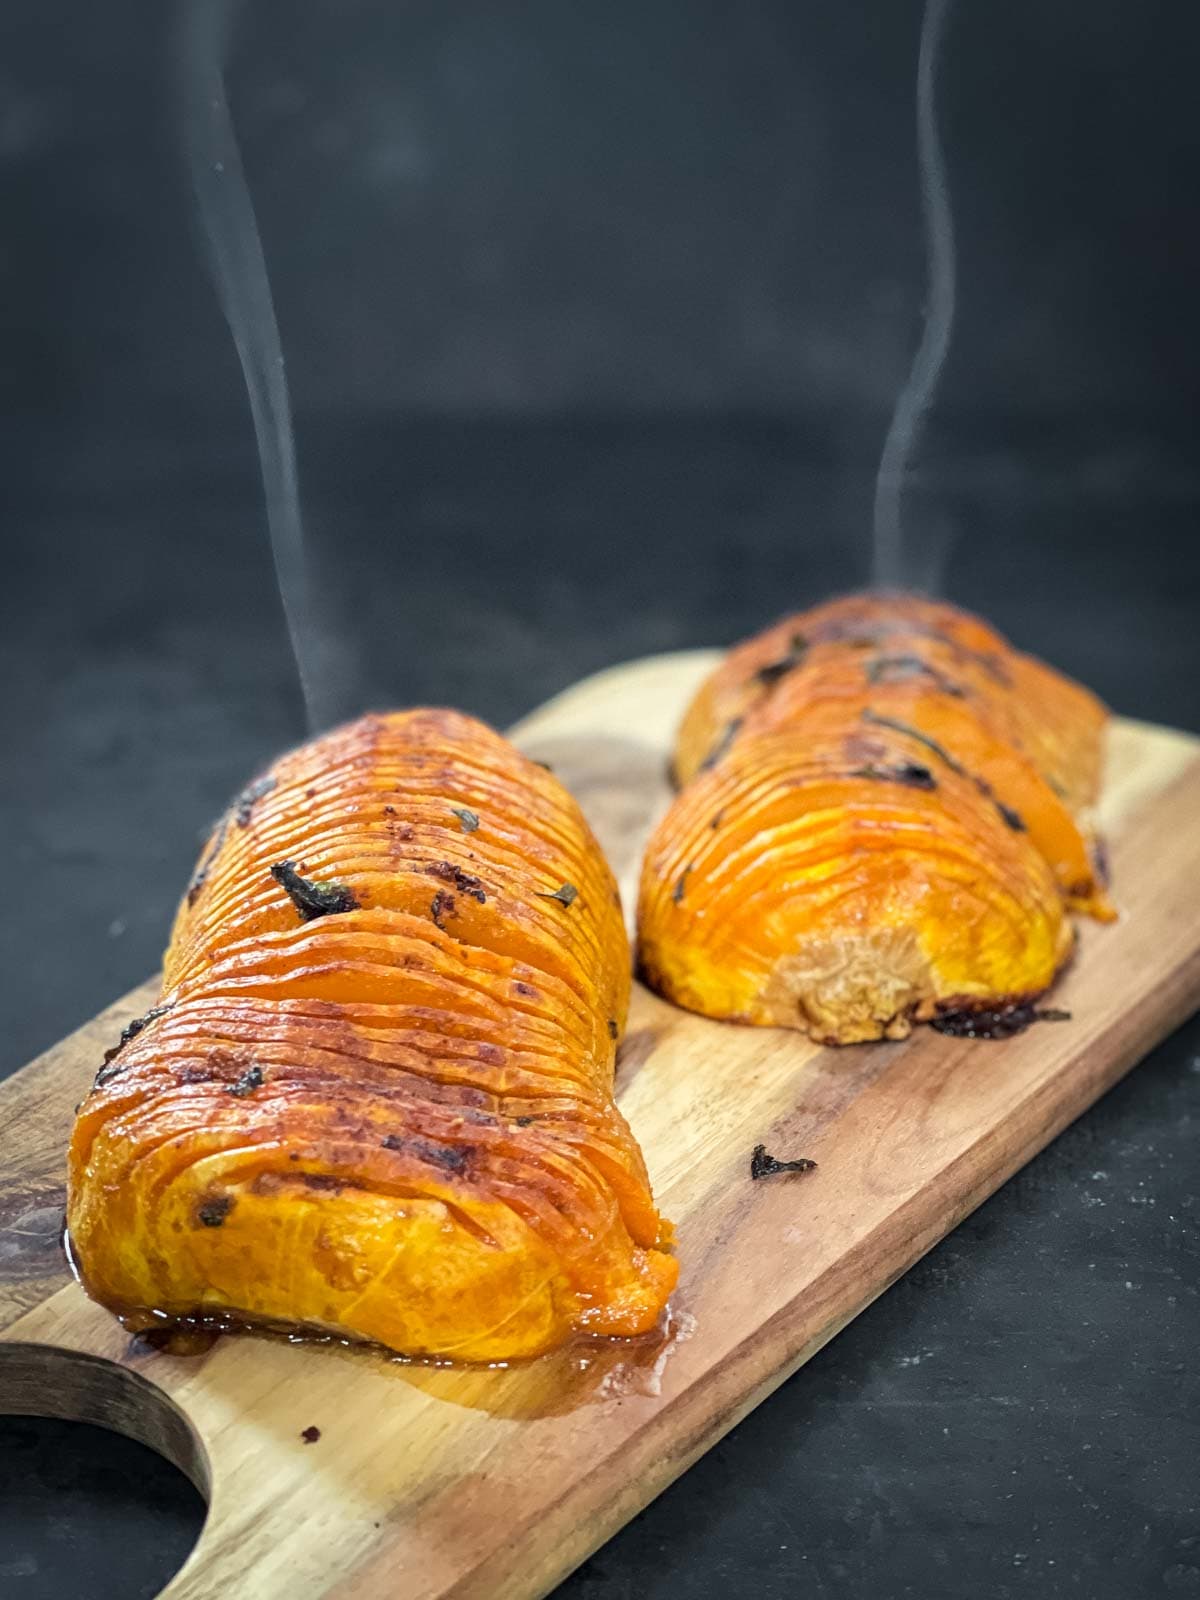 Steam hot roasted butternut squash on a wooden chopping board